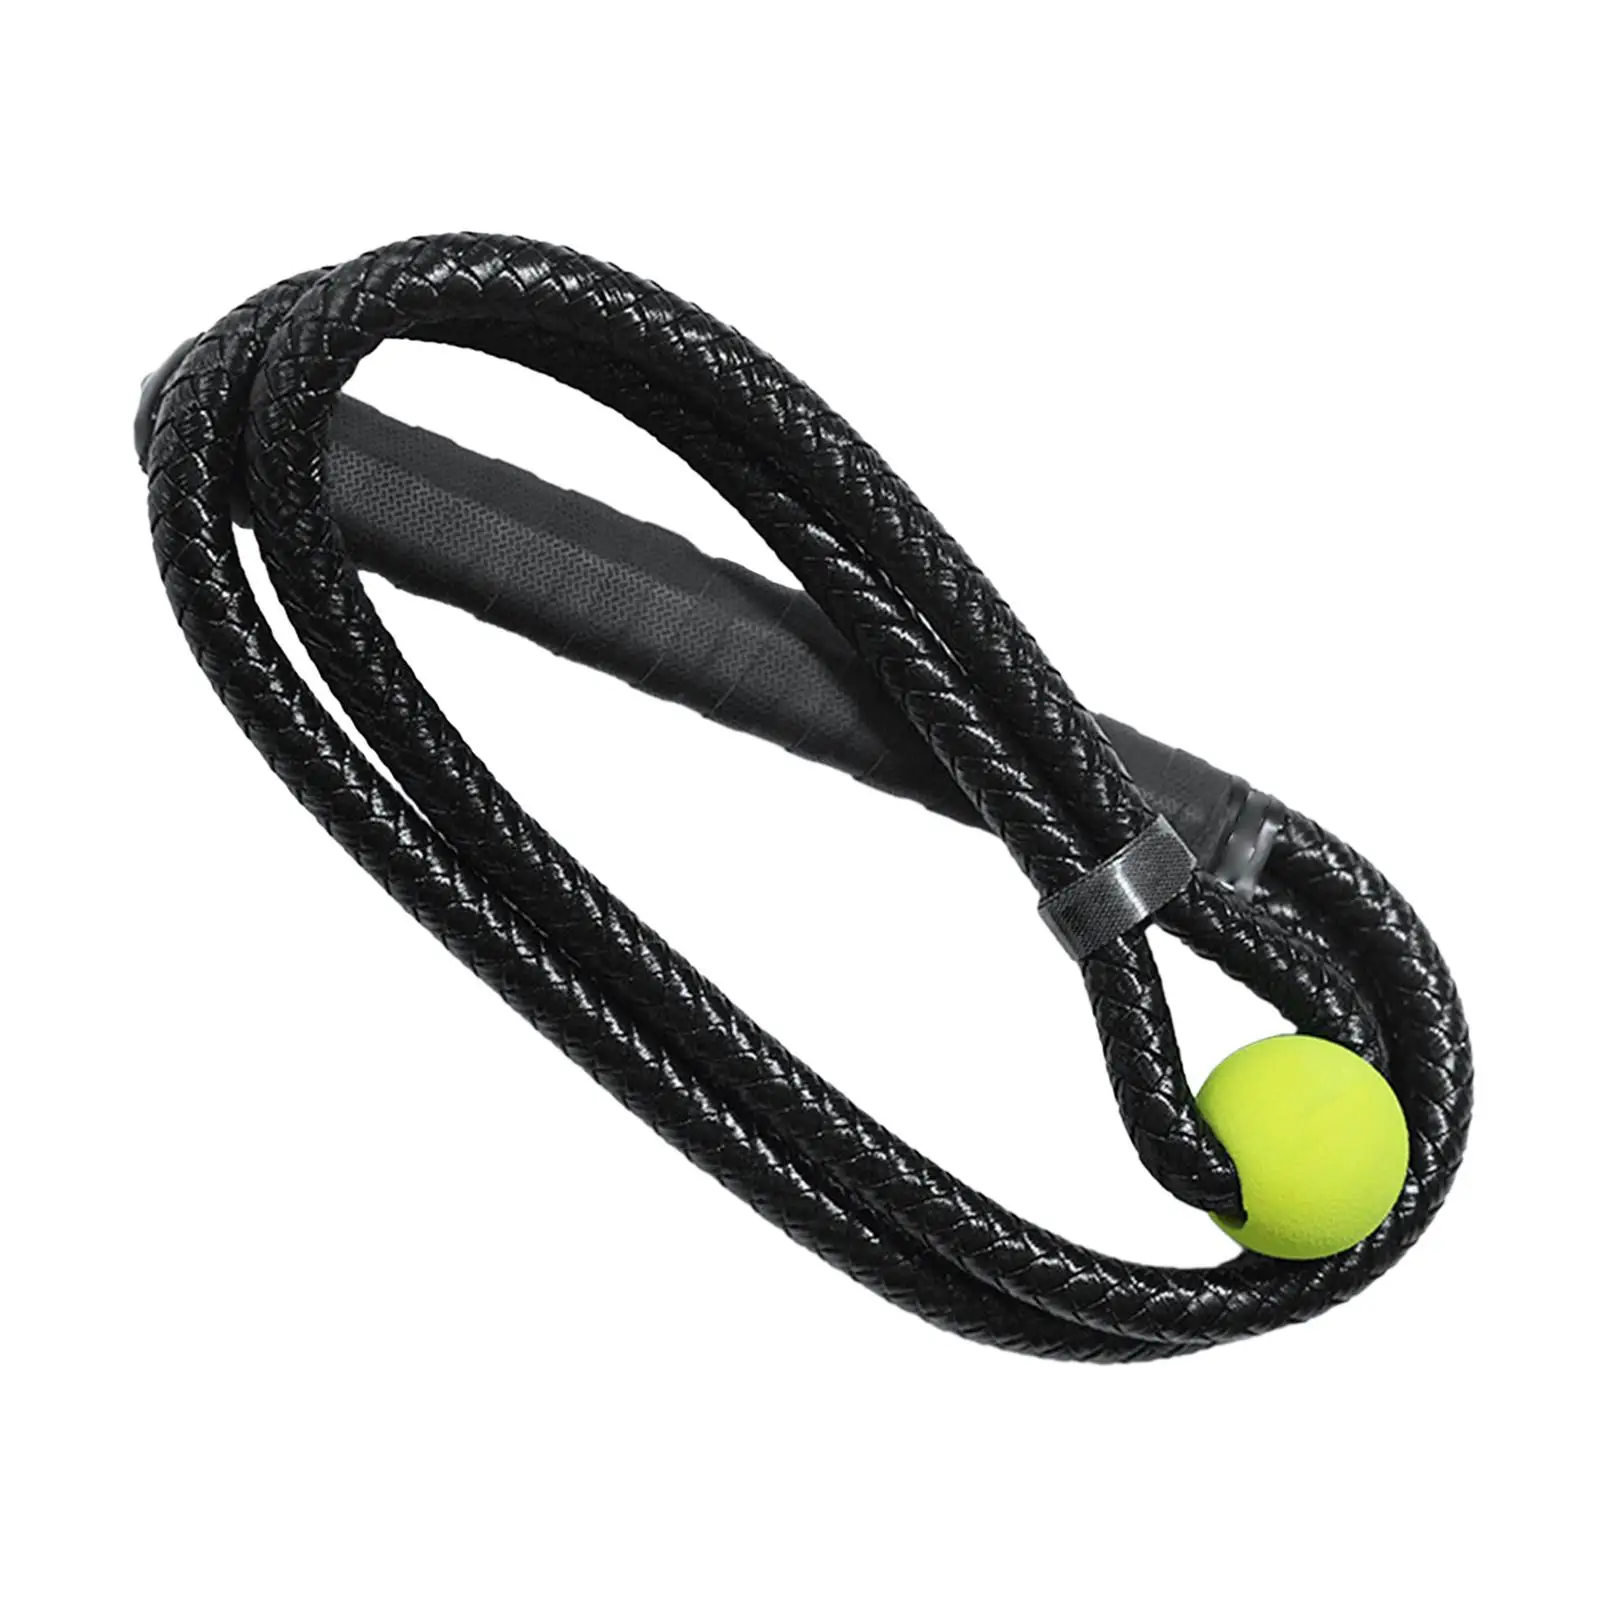 Golf Swing Training Aid Non Slip Practice Rope Trainer for Outdoor Beginner